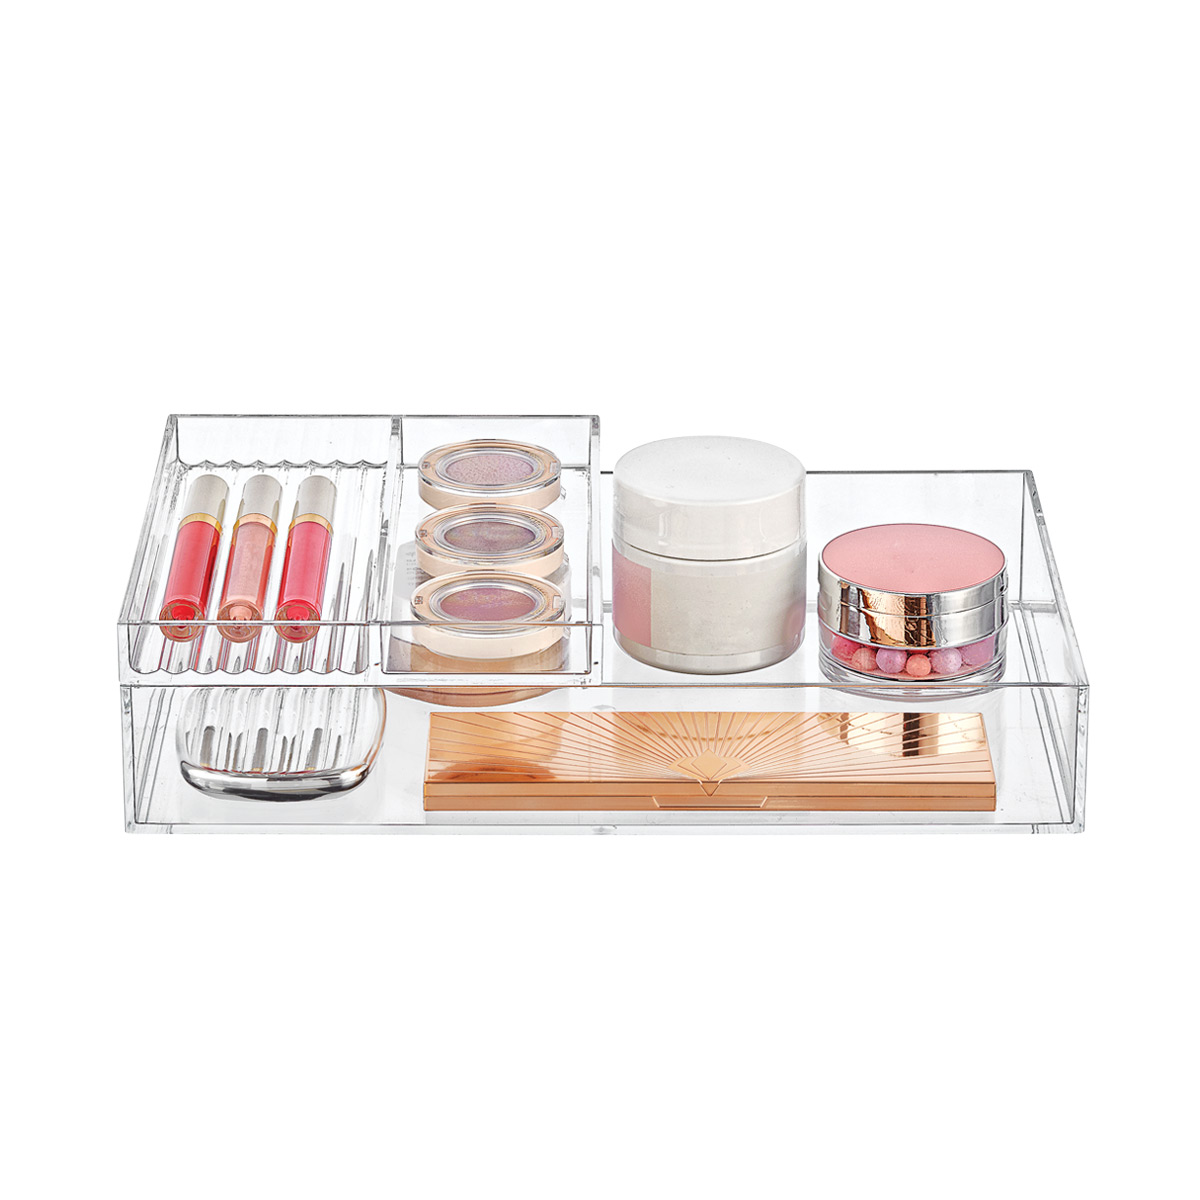 https://www.containerstore.com/catalogimages/336956/VisualBanner-Acrylic-4_R122117.jpg